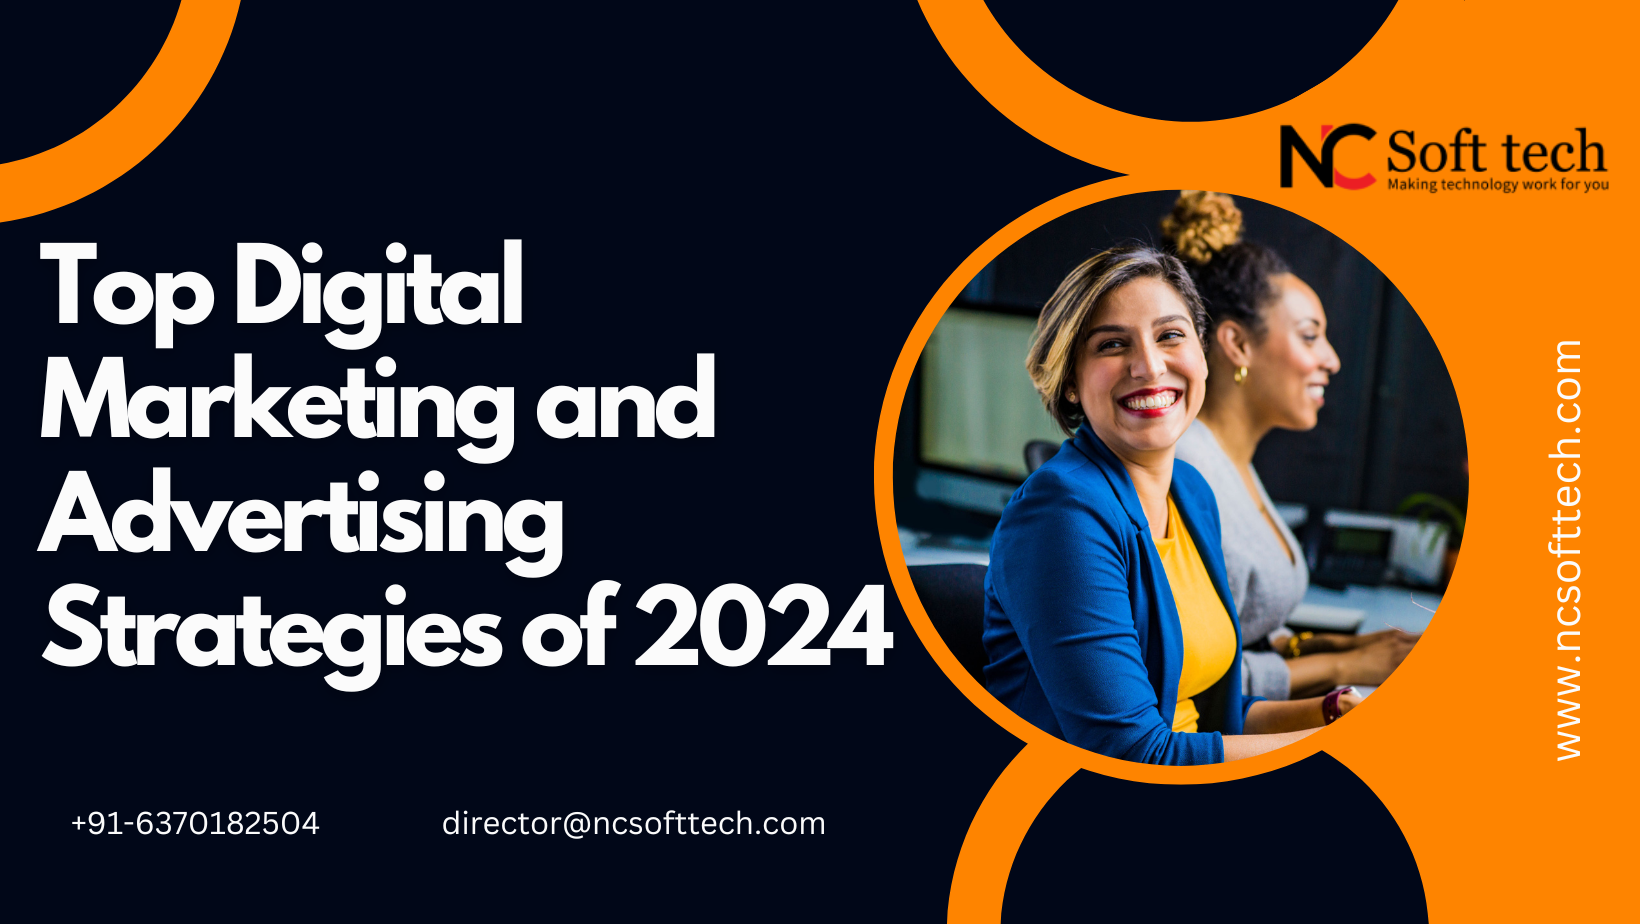 Unveiling the Top Digital Marketing and Advertising Strategies of 2024